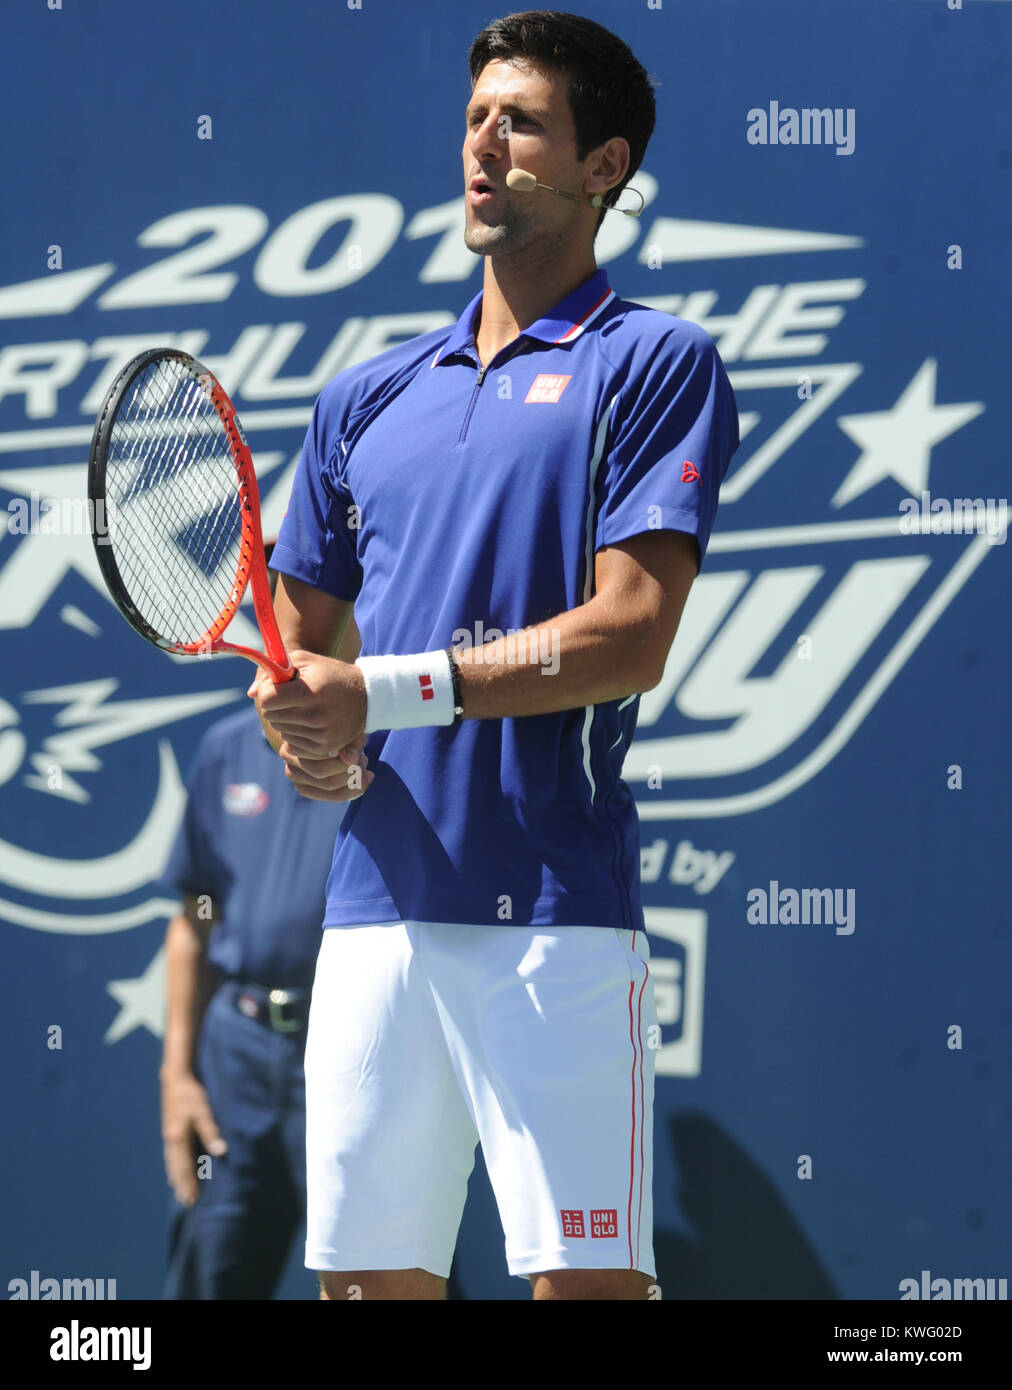 FLUSHING, NY - AUGUST 24:  Novak Djokovic attends Arthur Ash kids day at Arthur Ashe Stadium for the 2013 US Open at  the USTA Billie Jean King National Tennis Center on August 24, 2013 in the Flushing neighborhood of the Queens borough of New York City.   People:  Novak Djokovic Stock Photo